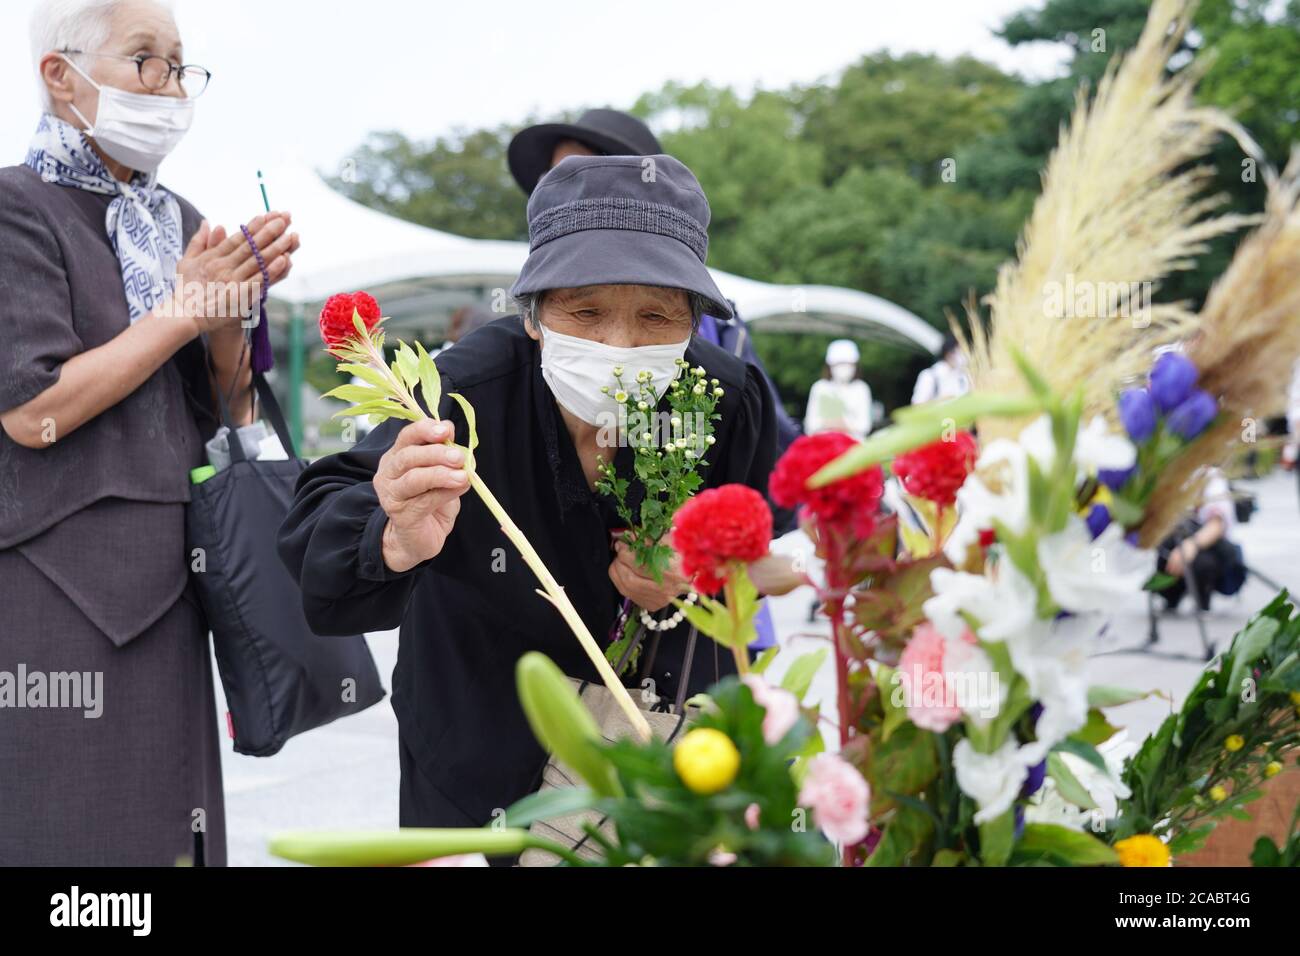 An elderly woman lays flowers at the Hiroshima Peace Memorial Ceremony.Hiroshima marks the 75th anniversary of the U.S. atomic bombing which killed about 150,000 people and destroyed the entire city during World War II. Stock Photo